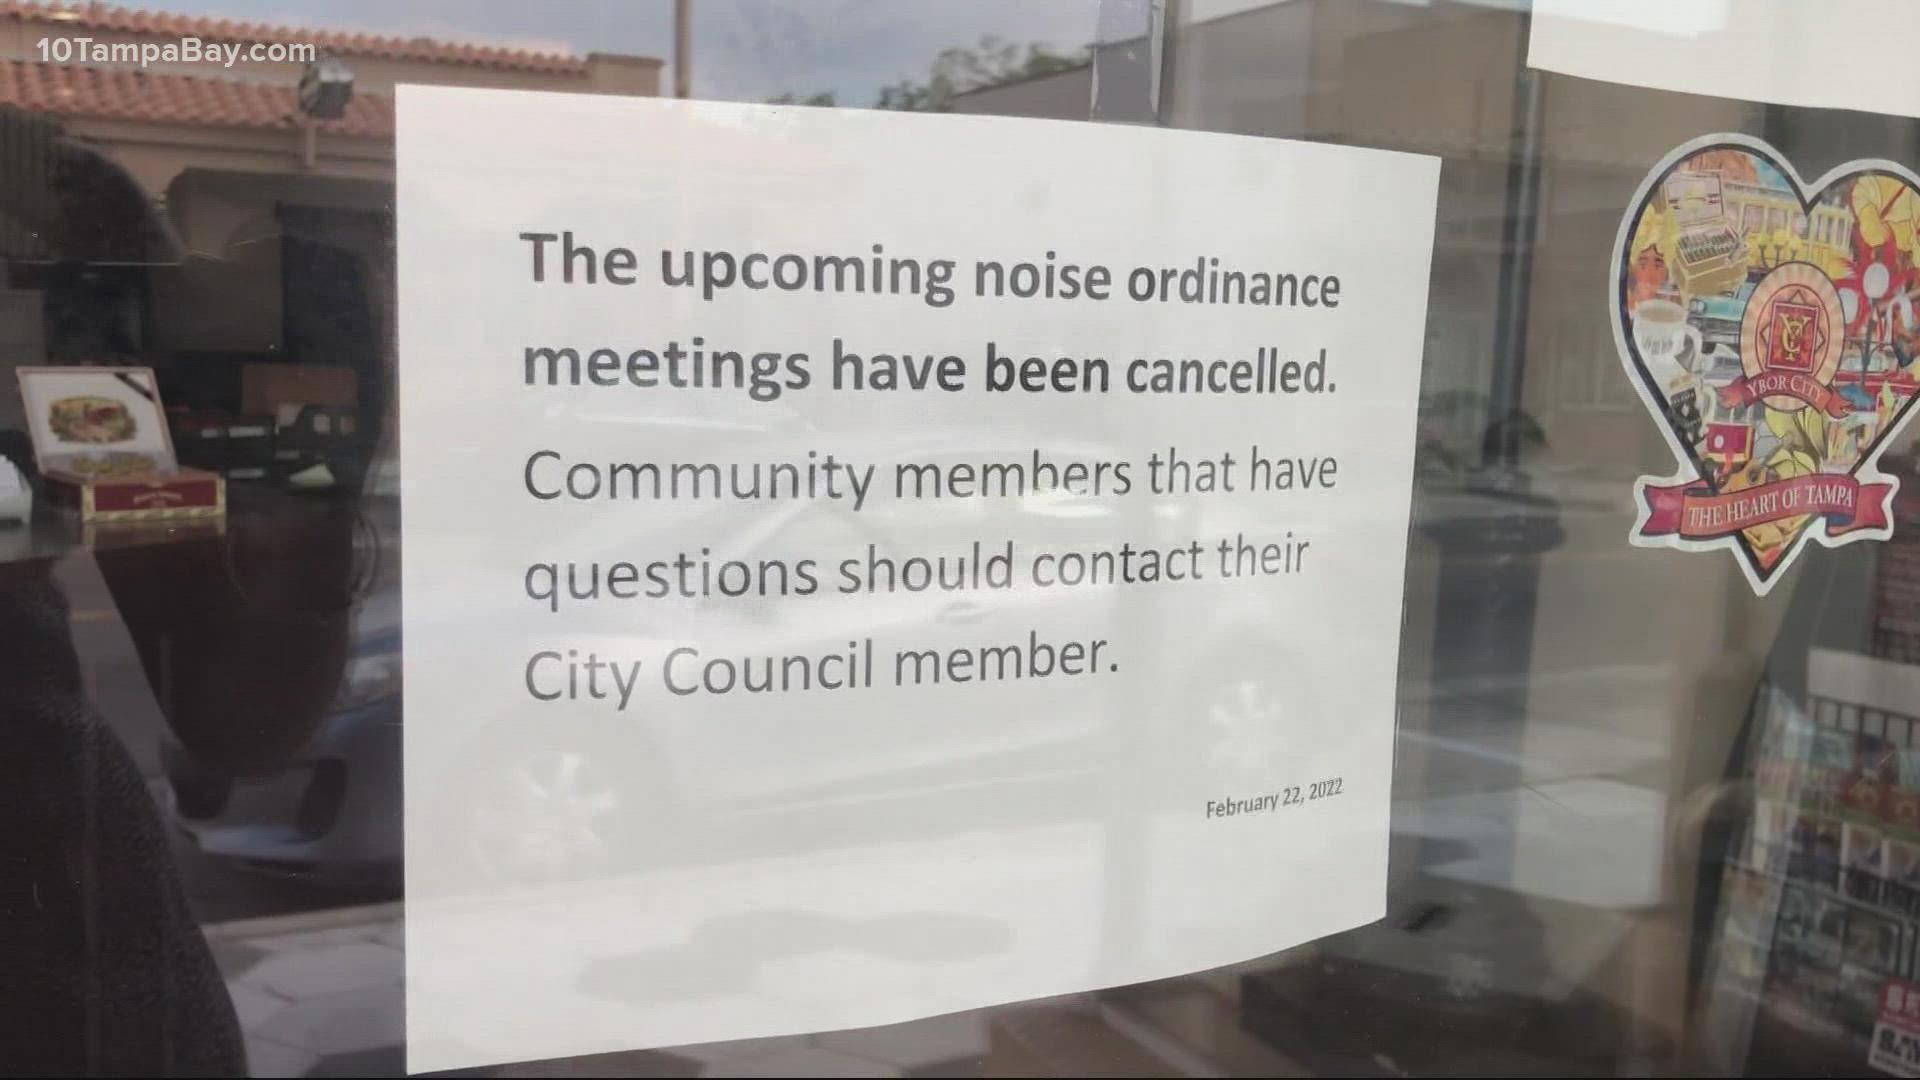 'By them canceling the meetings, it gives us no voice, whatsoever,' said Mammie Luke, the CEO at Yuppi Eatery in Ybor City. 'On either side.'